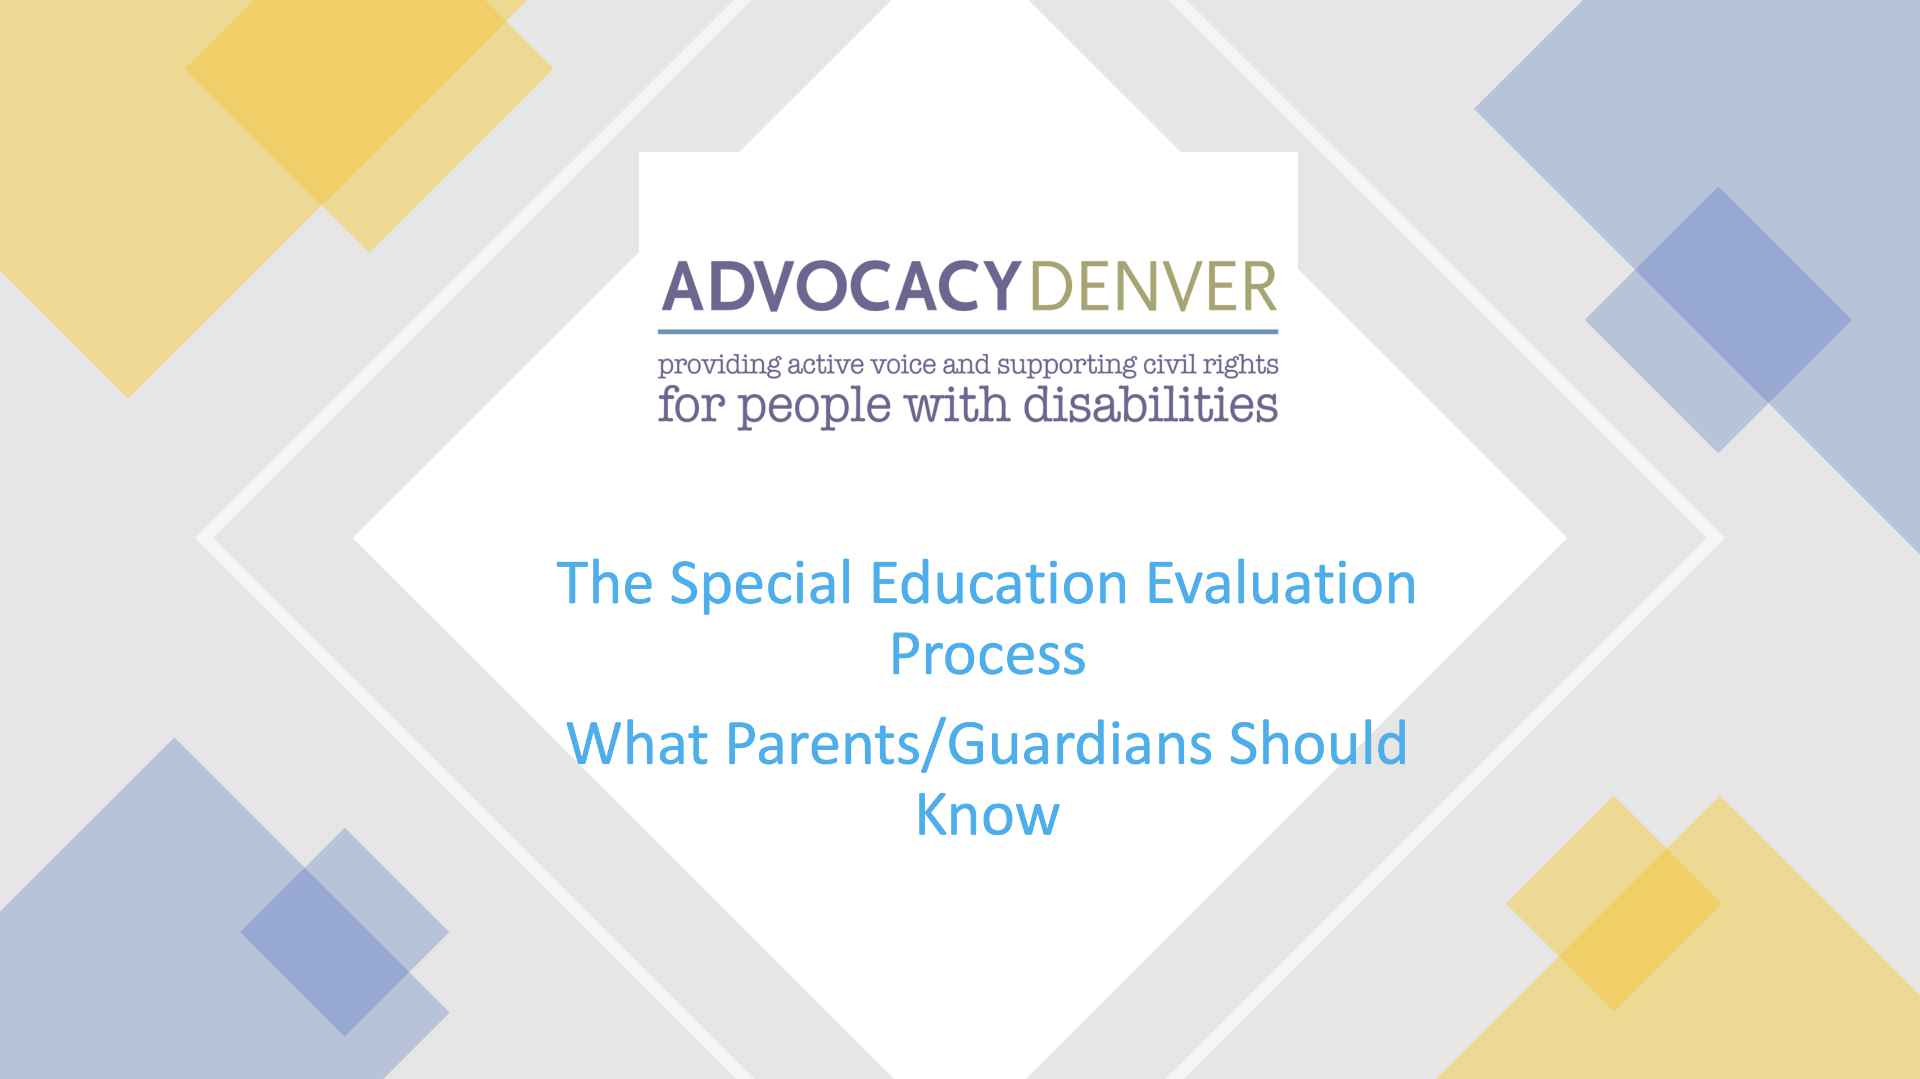 The Special Education Evaluation Process